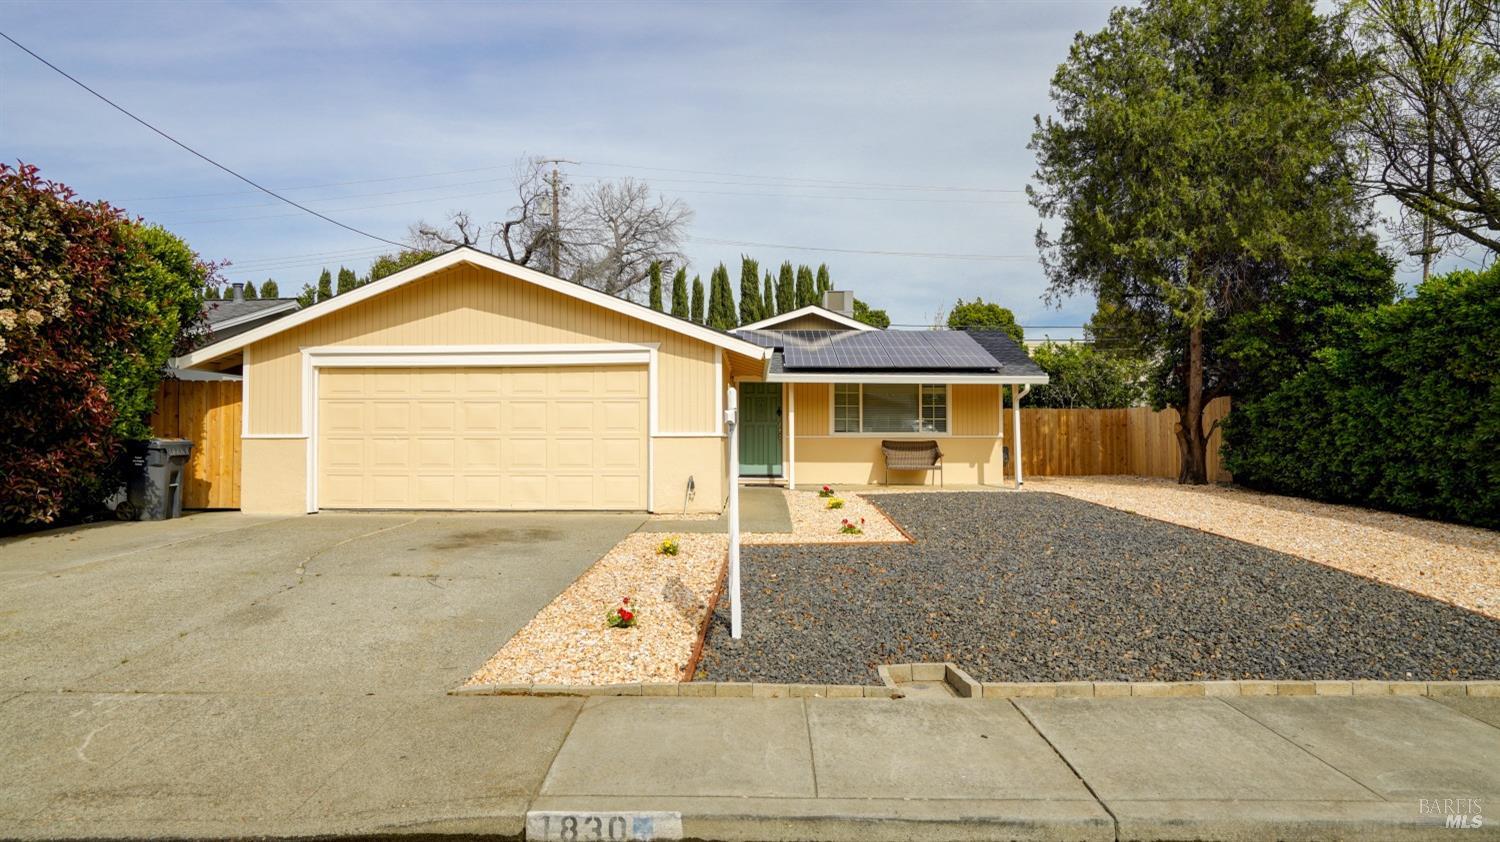 You won't want to miss this beautifully remodeled home with LV flooring, new carpet in the bedrooms,